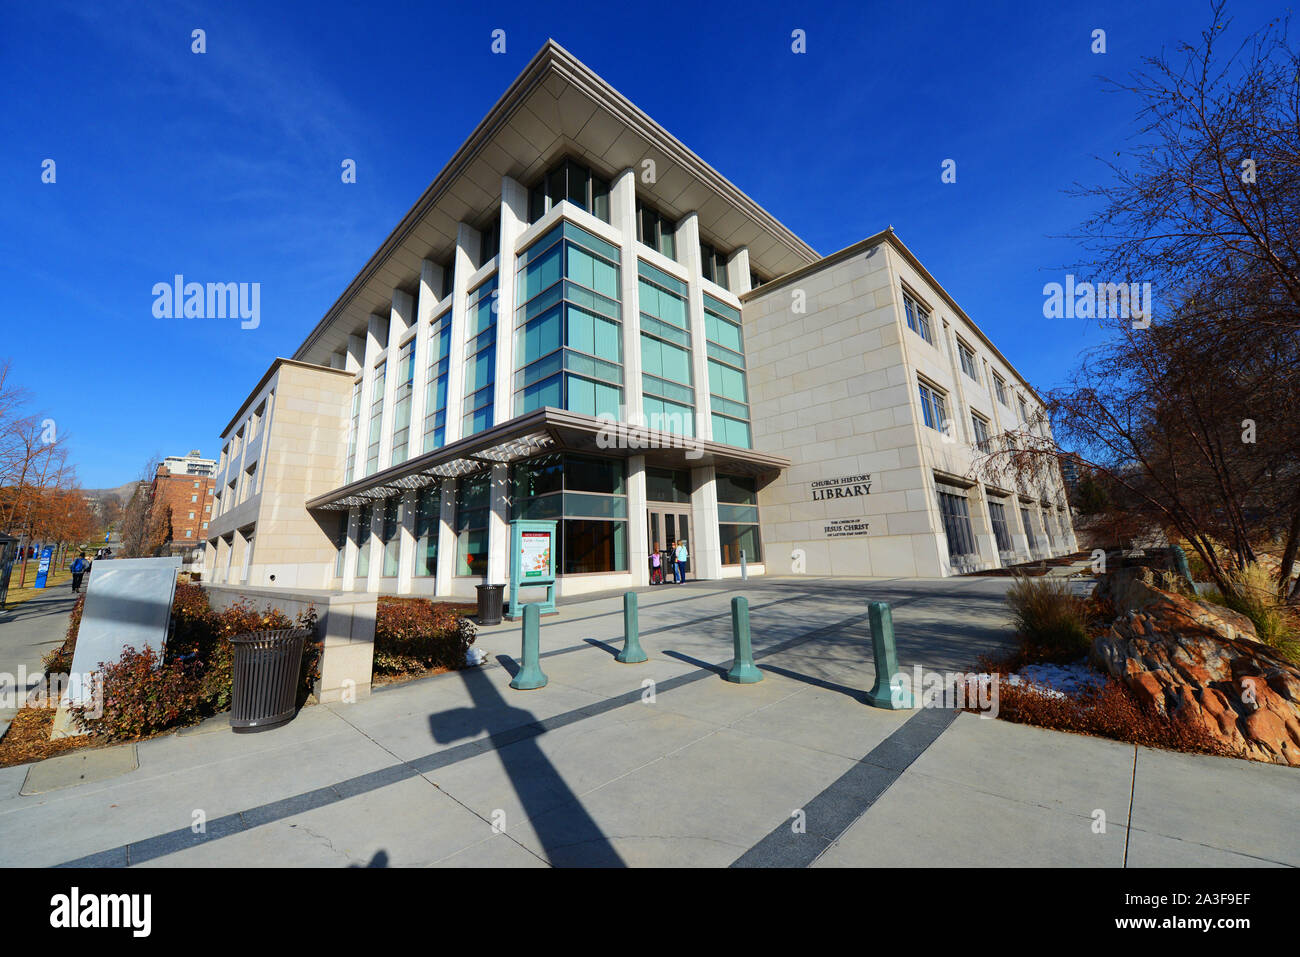 The LDS Church library building. Stock Photo